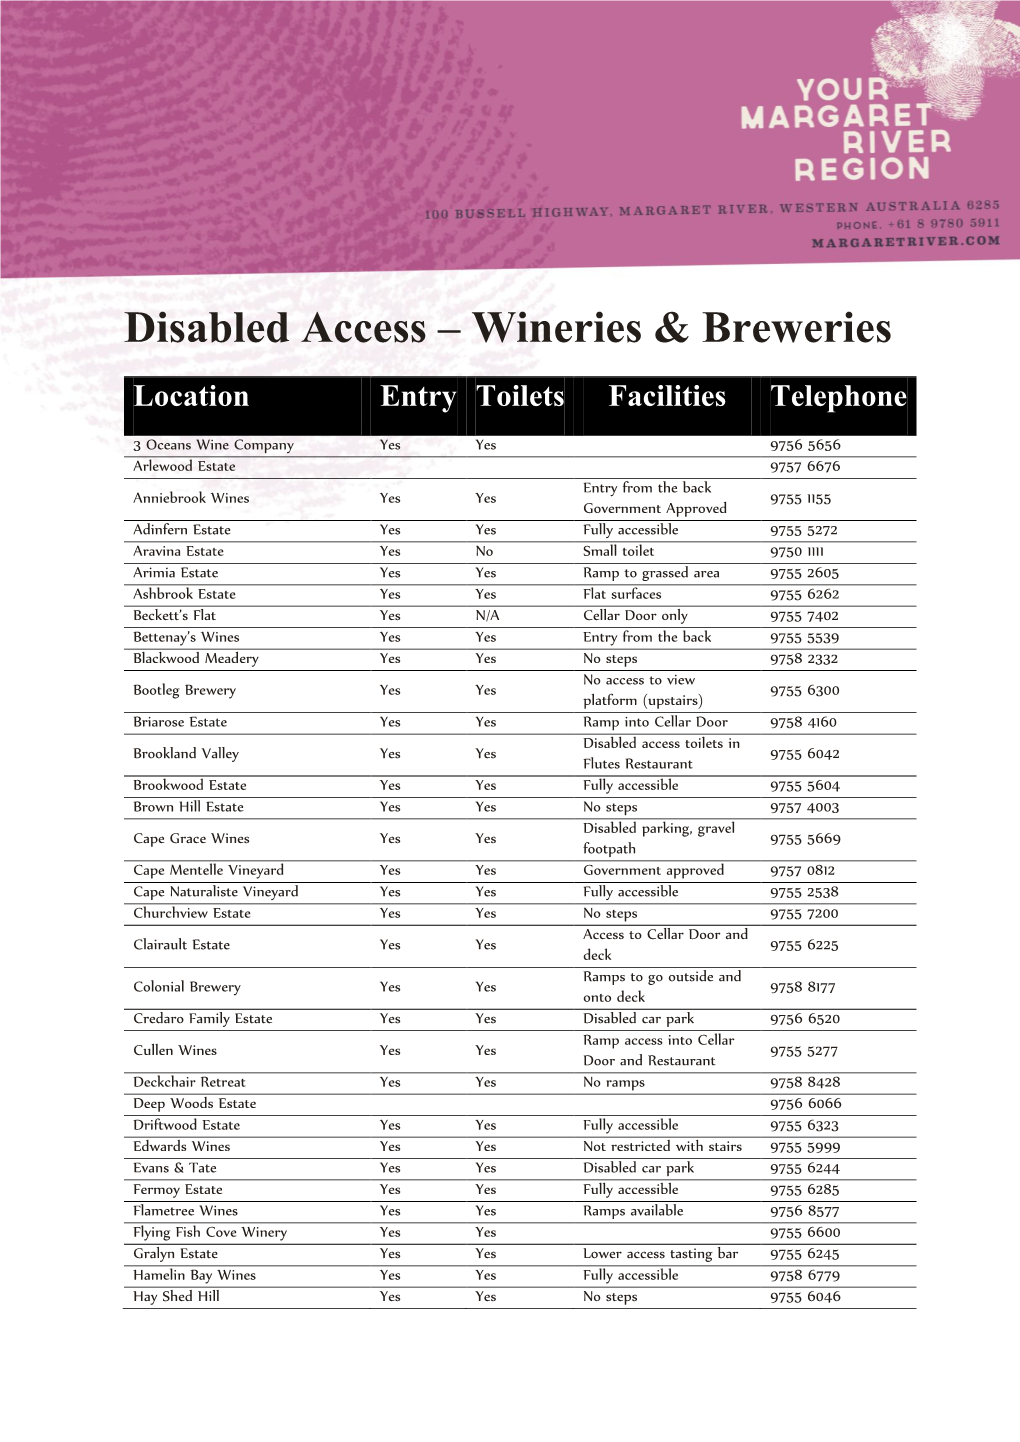 Disabled Access – Wineries & Breweries